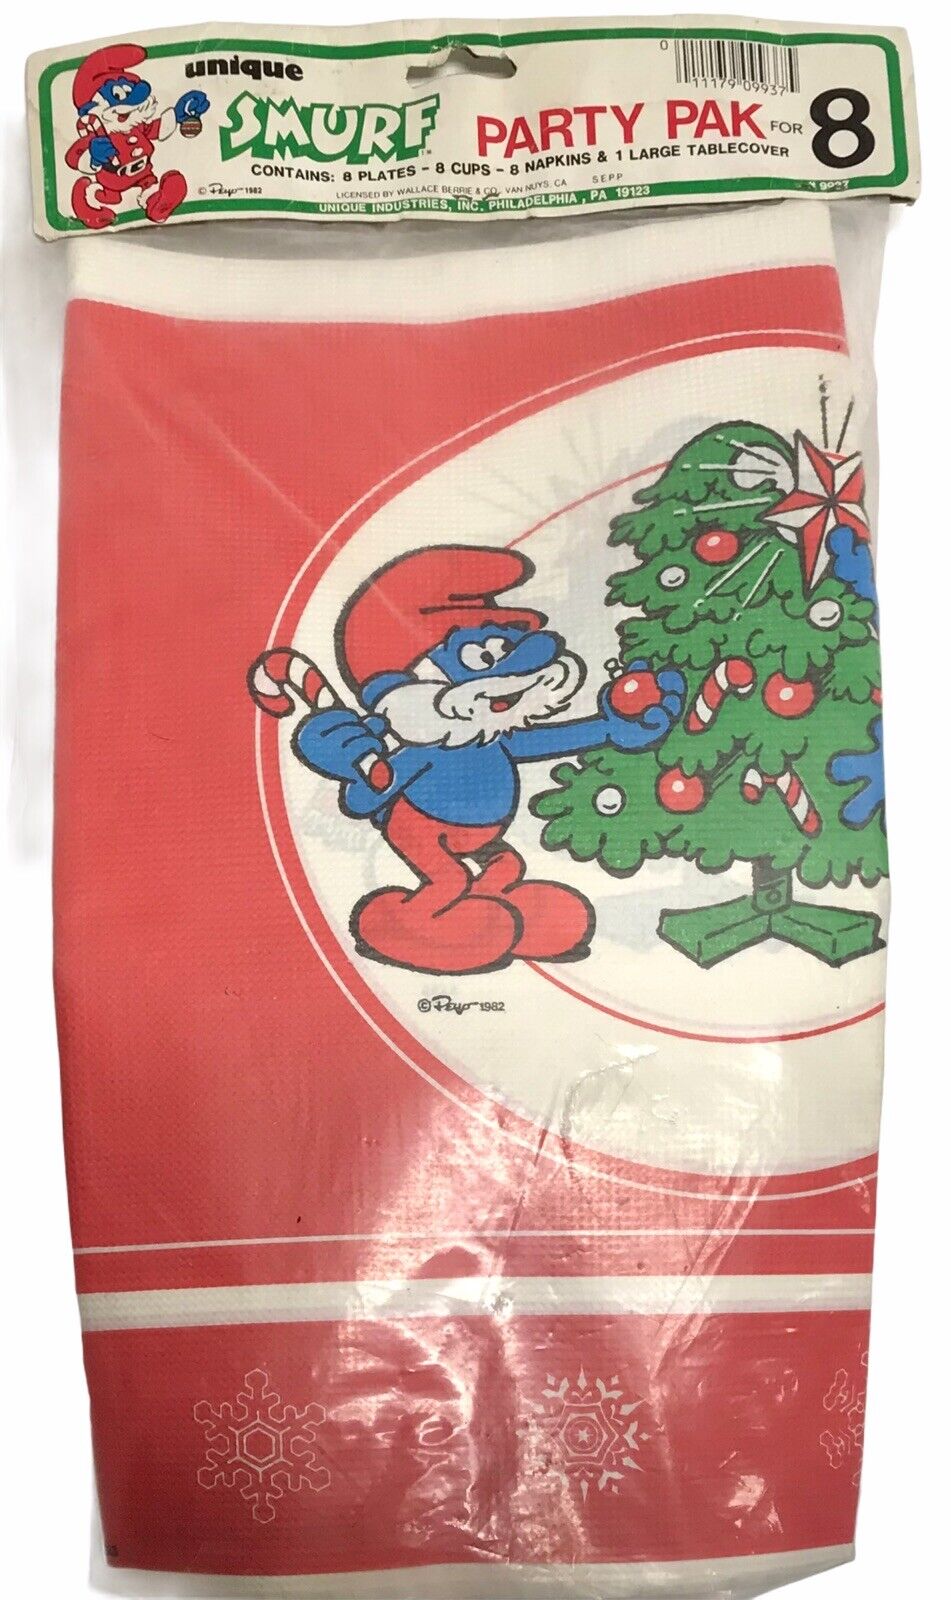 1982 - Smurf Christmas Party Pack Plates Cups Napkins Table Cloth 8 Each New